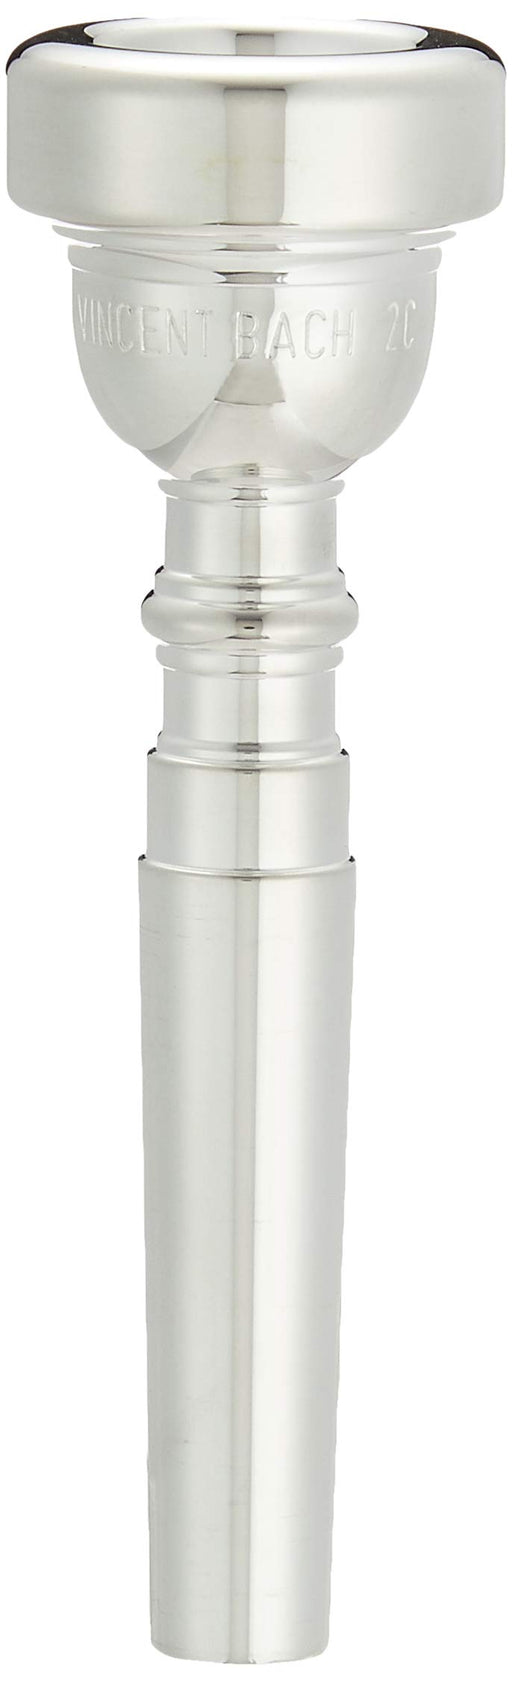 Bach 3512C Trumpet Mouthpiece 2C silver plated finish [Mouthpiece Only] 16.5mm_1